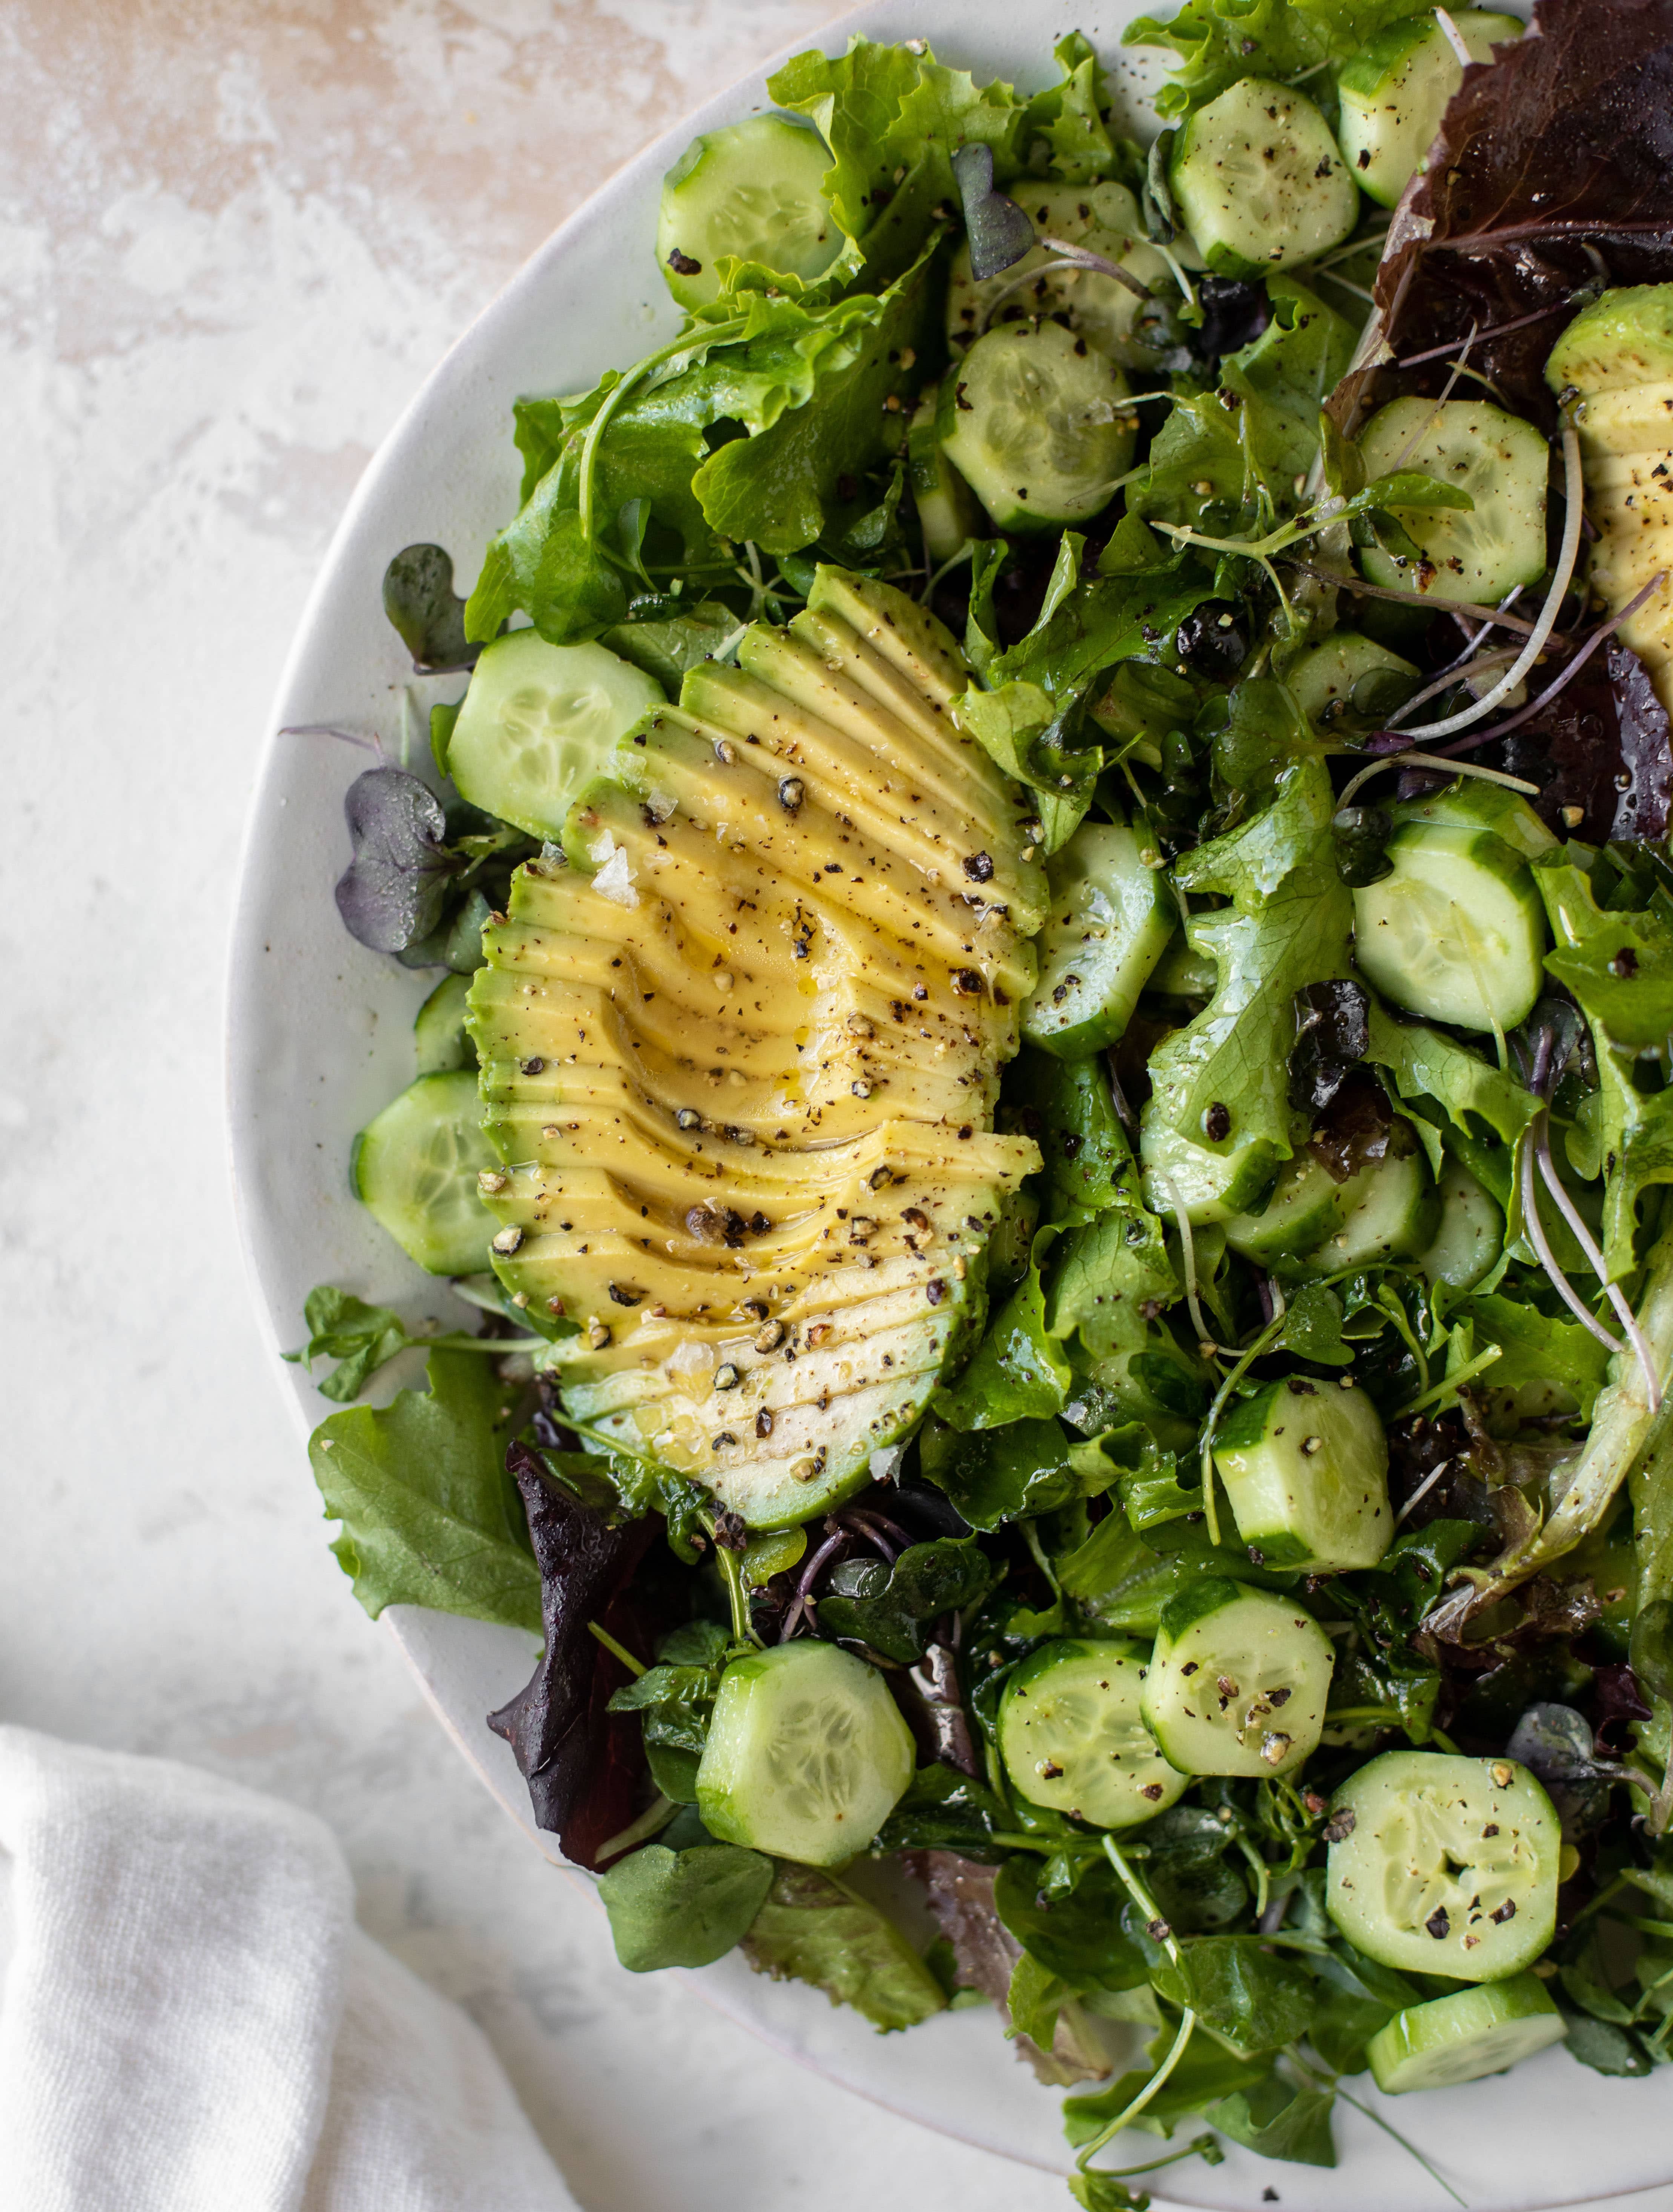 my favorite house salads and dressings!